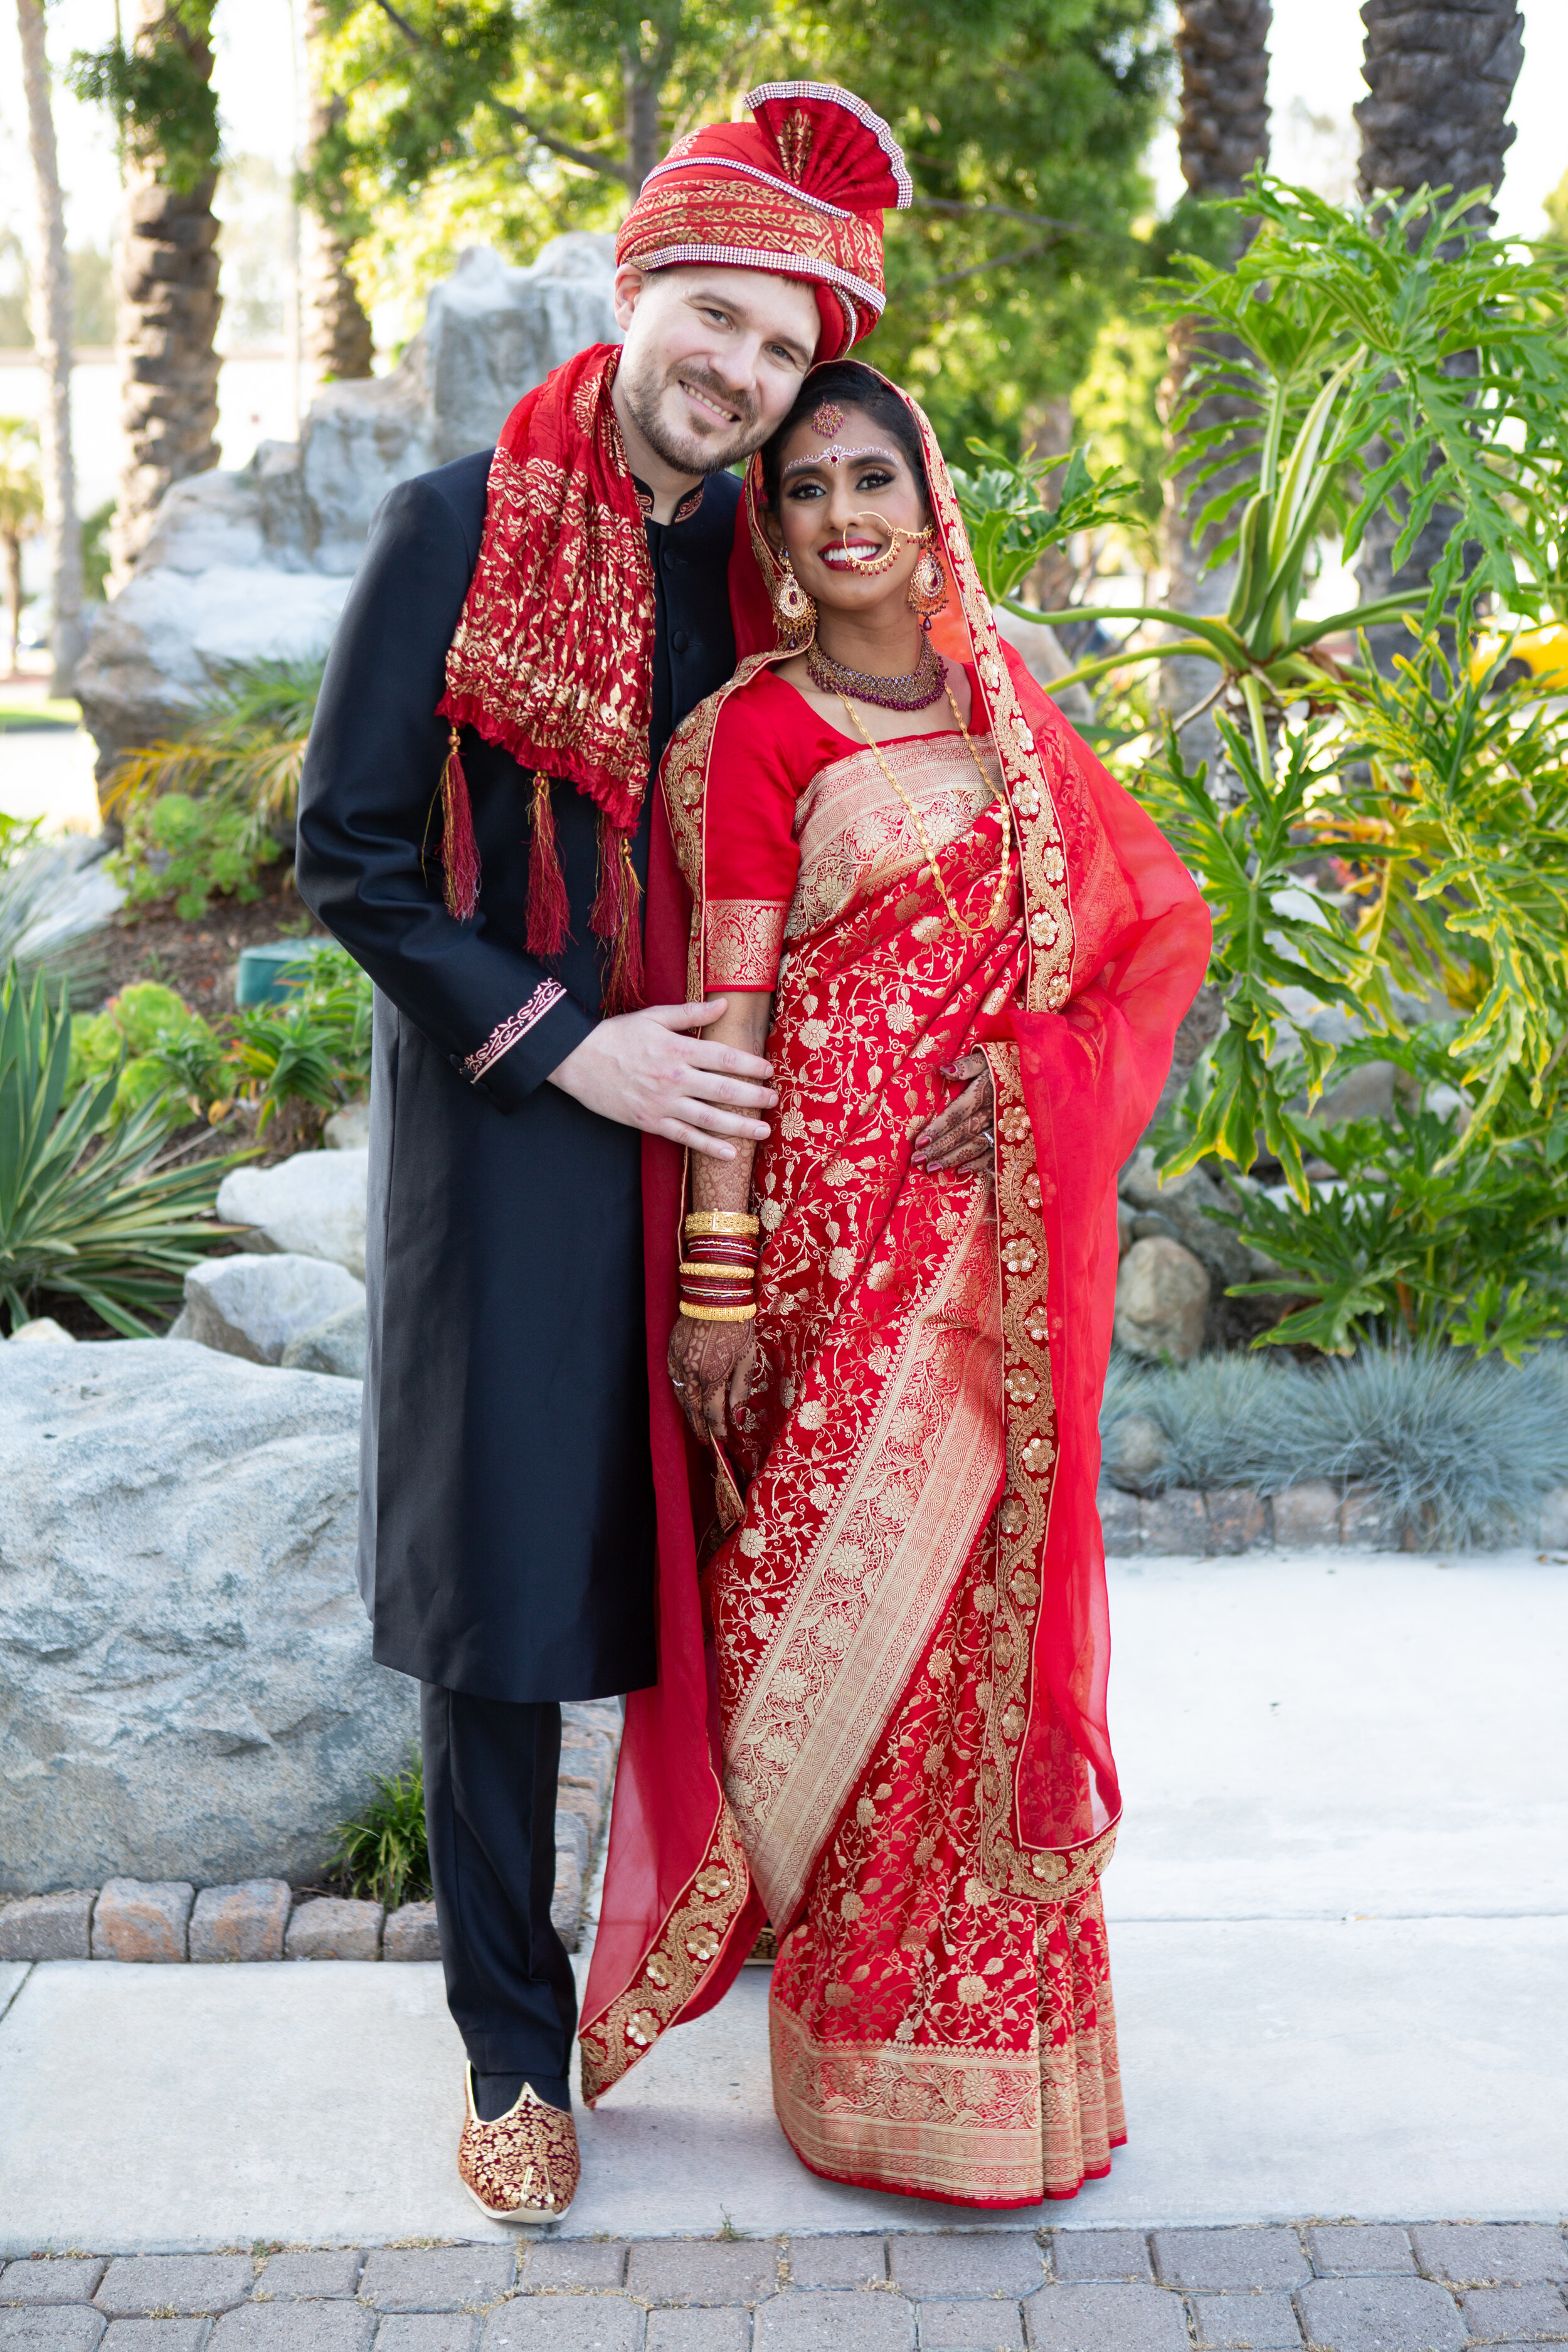  Los Angeles Indian Wedding Photography 